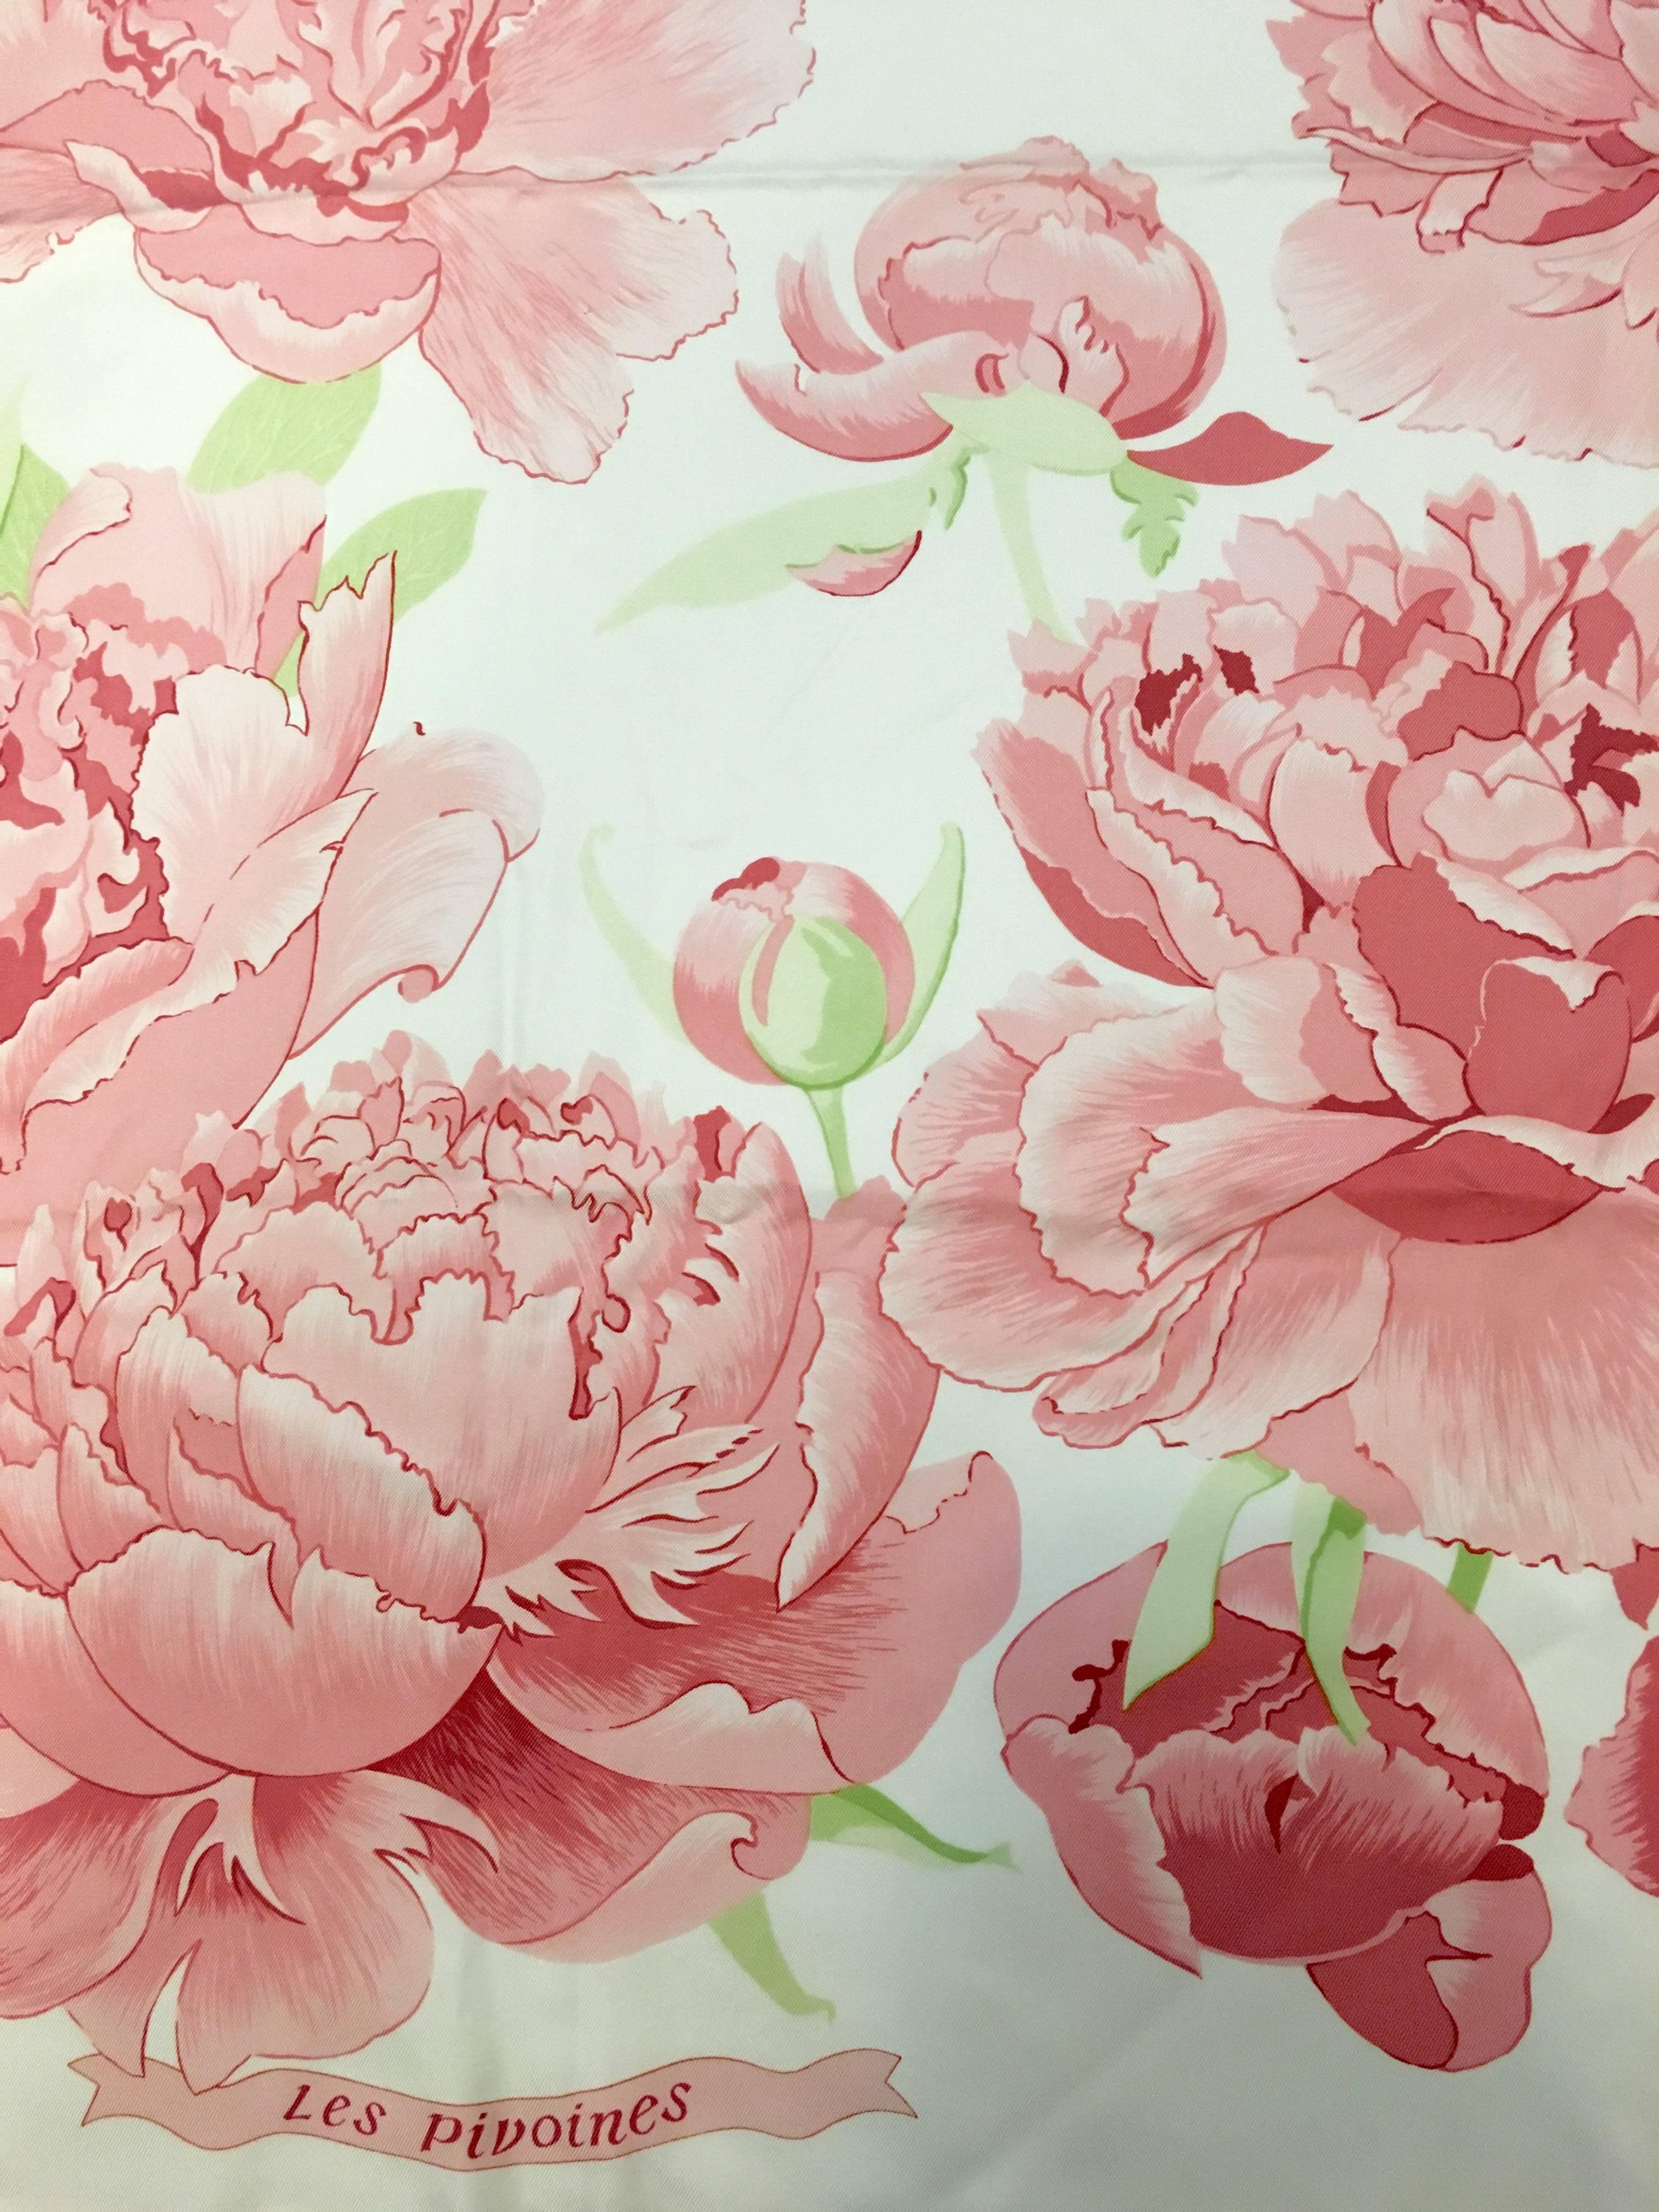 Artist Christiane Vauzelles captured the beauty of peonies in this magnificent silk Hermes scarf.  Hermes scarves are collected world wide for their colorful designs.  This 35